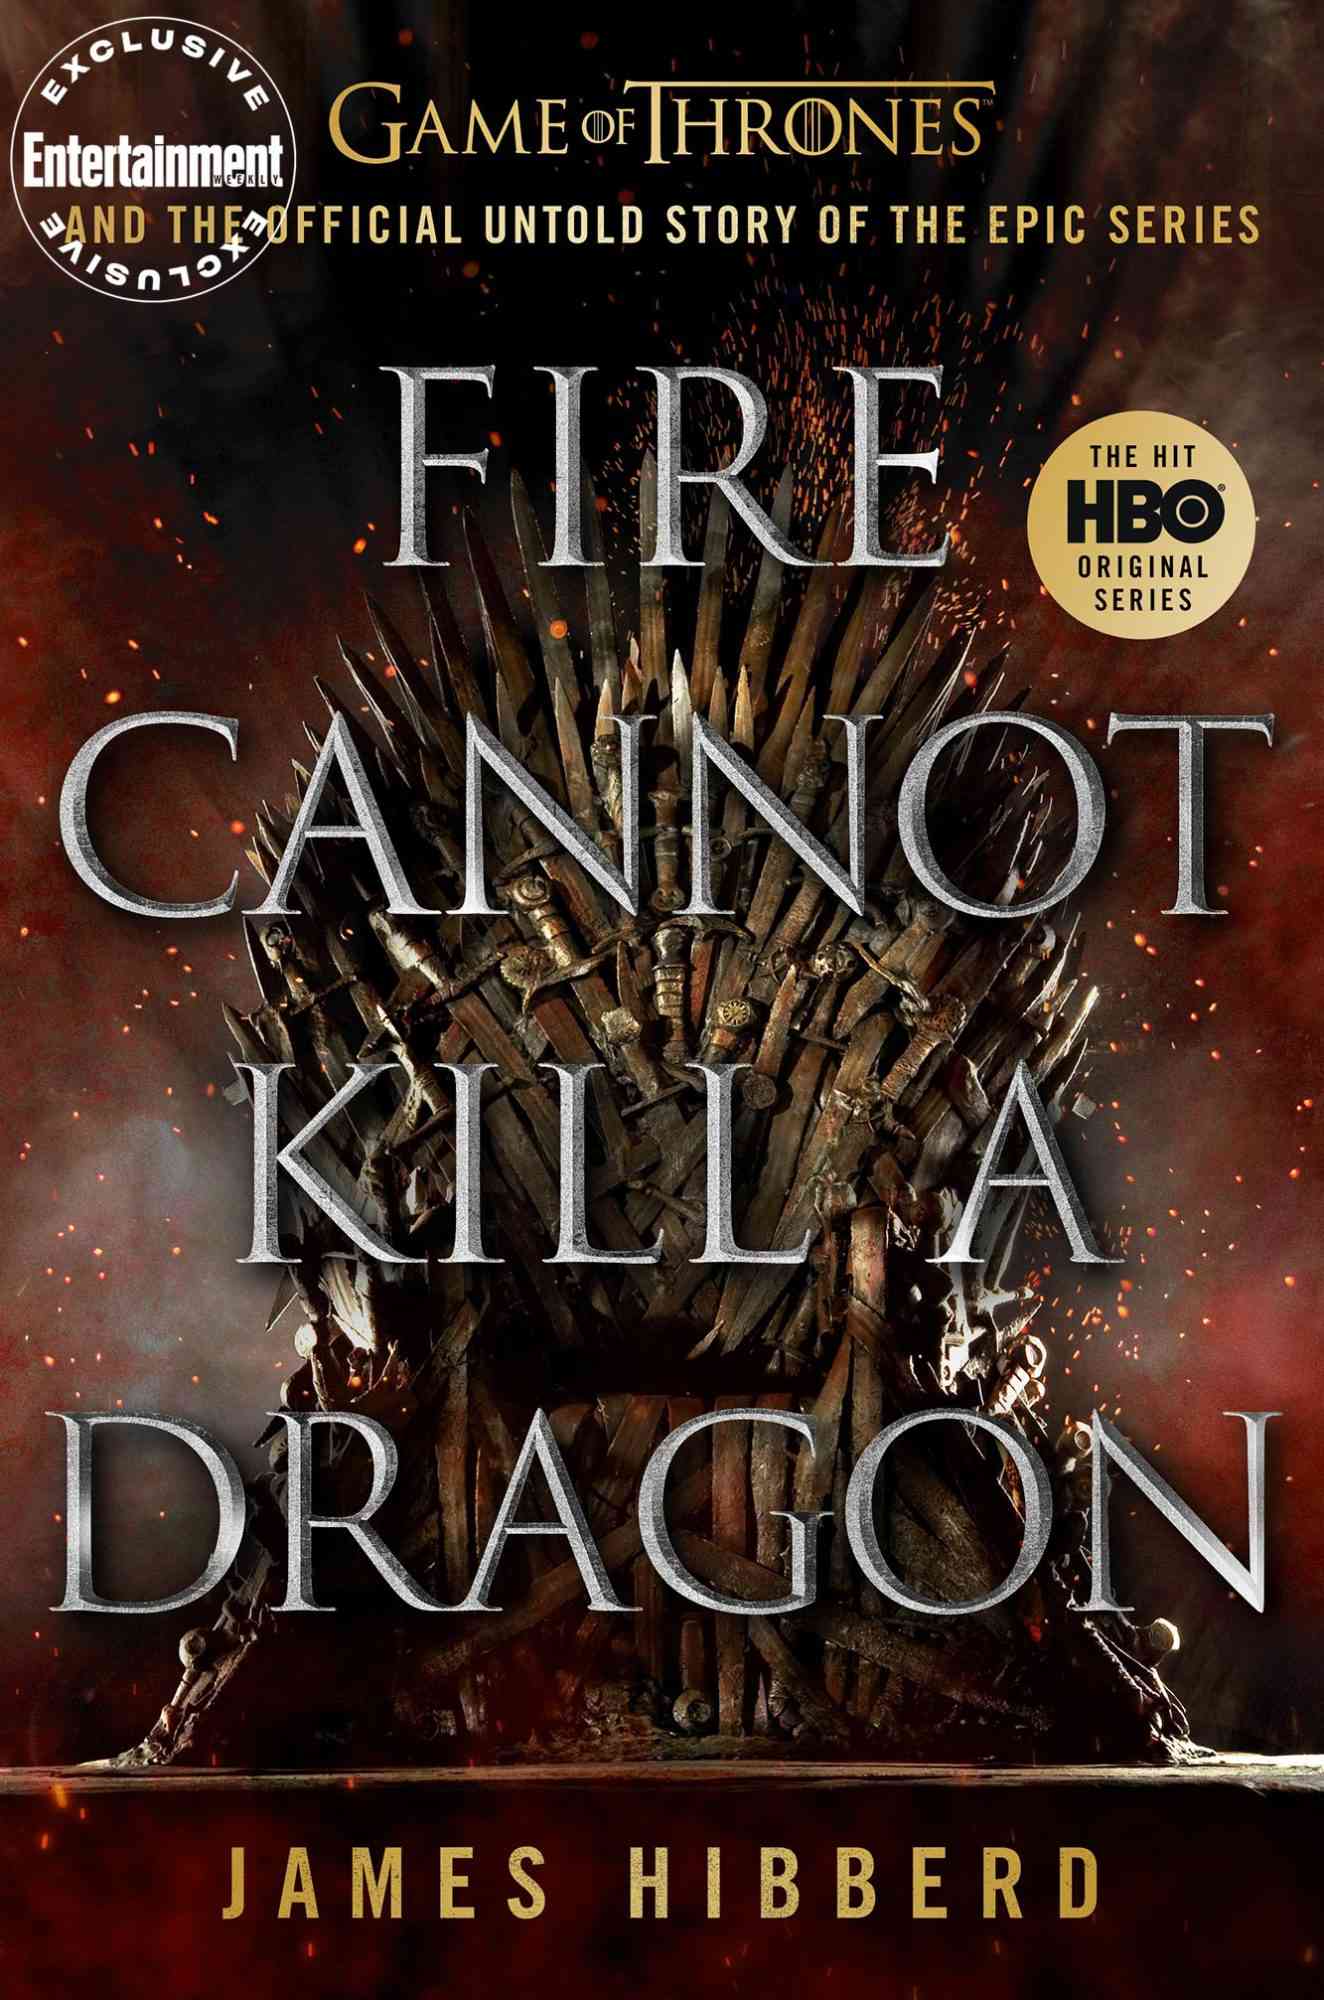 Fire Cannot Kill a Dragon by James Hibberd